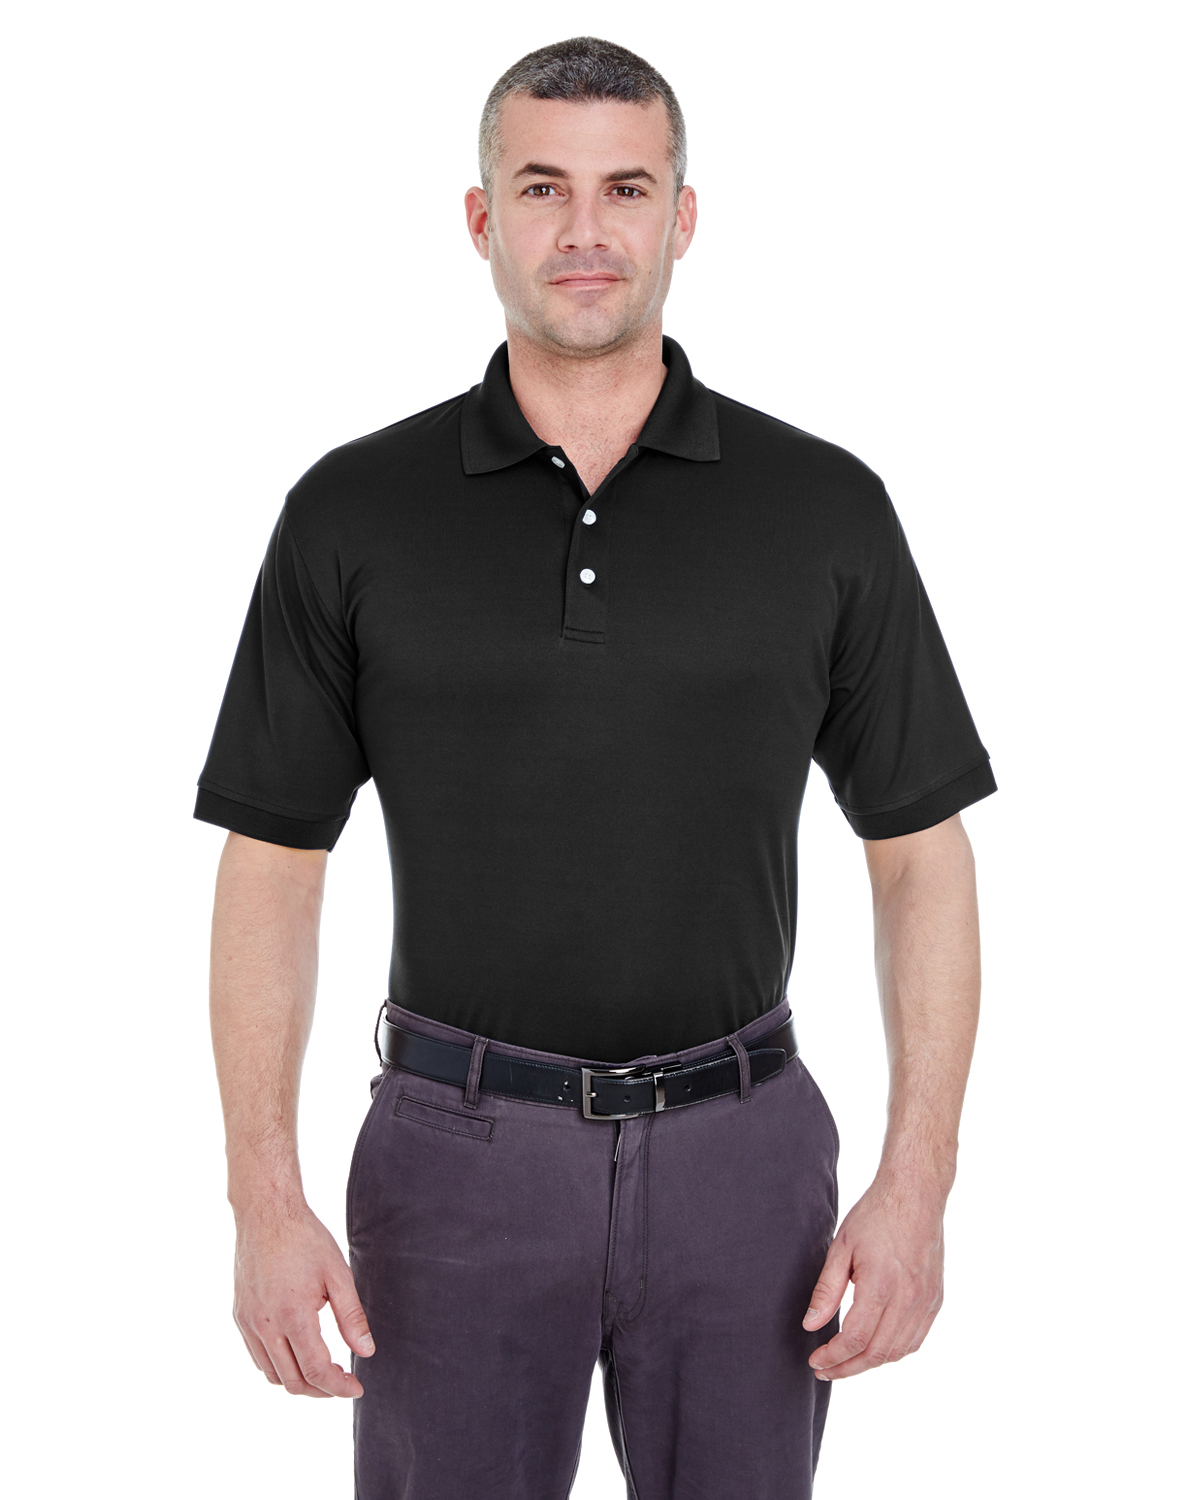 Ultra Club 8315 - Men's Platinum Performance Pique Polo with Temp Control Technology